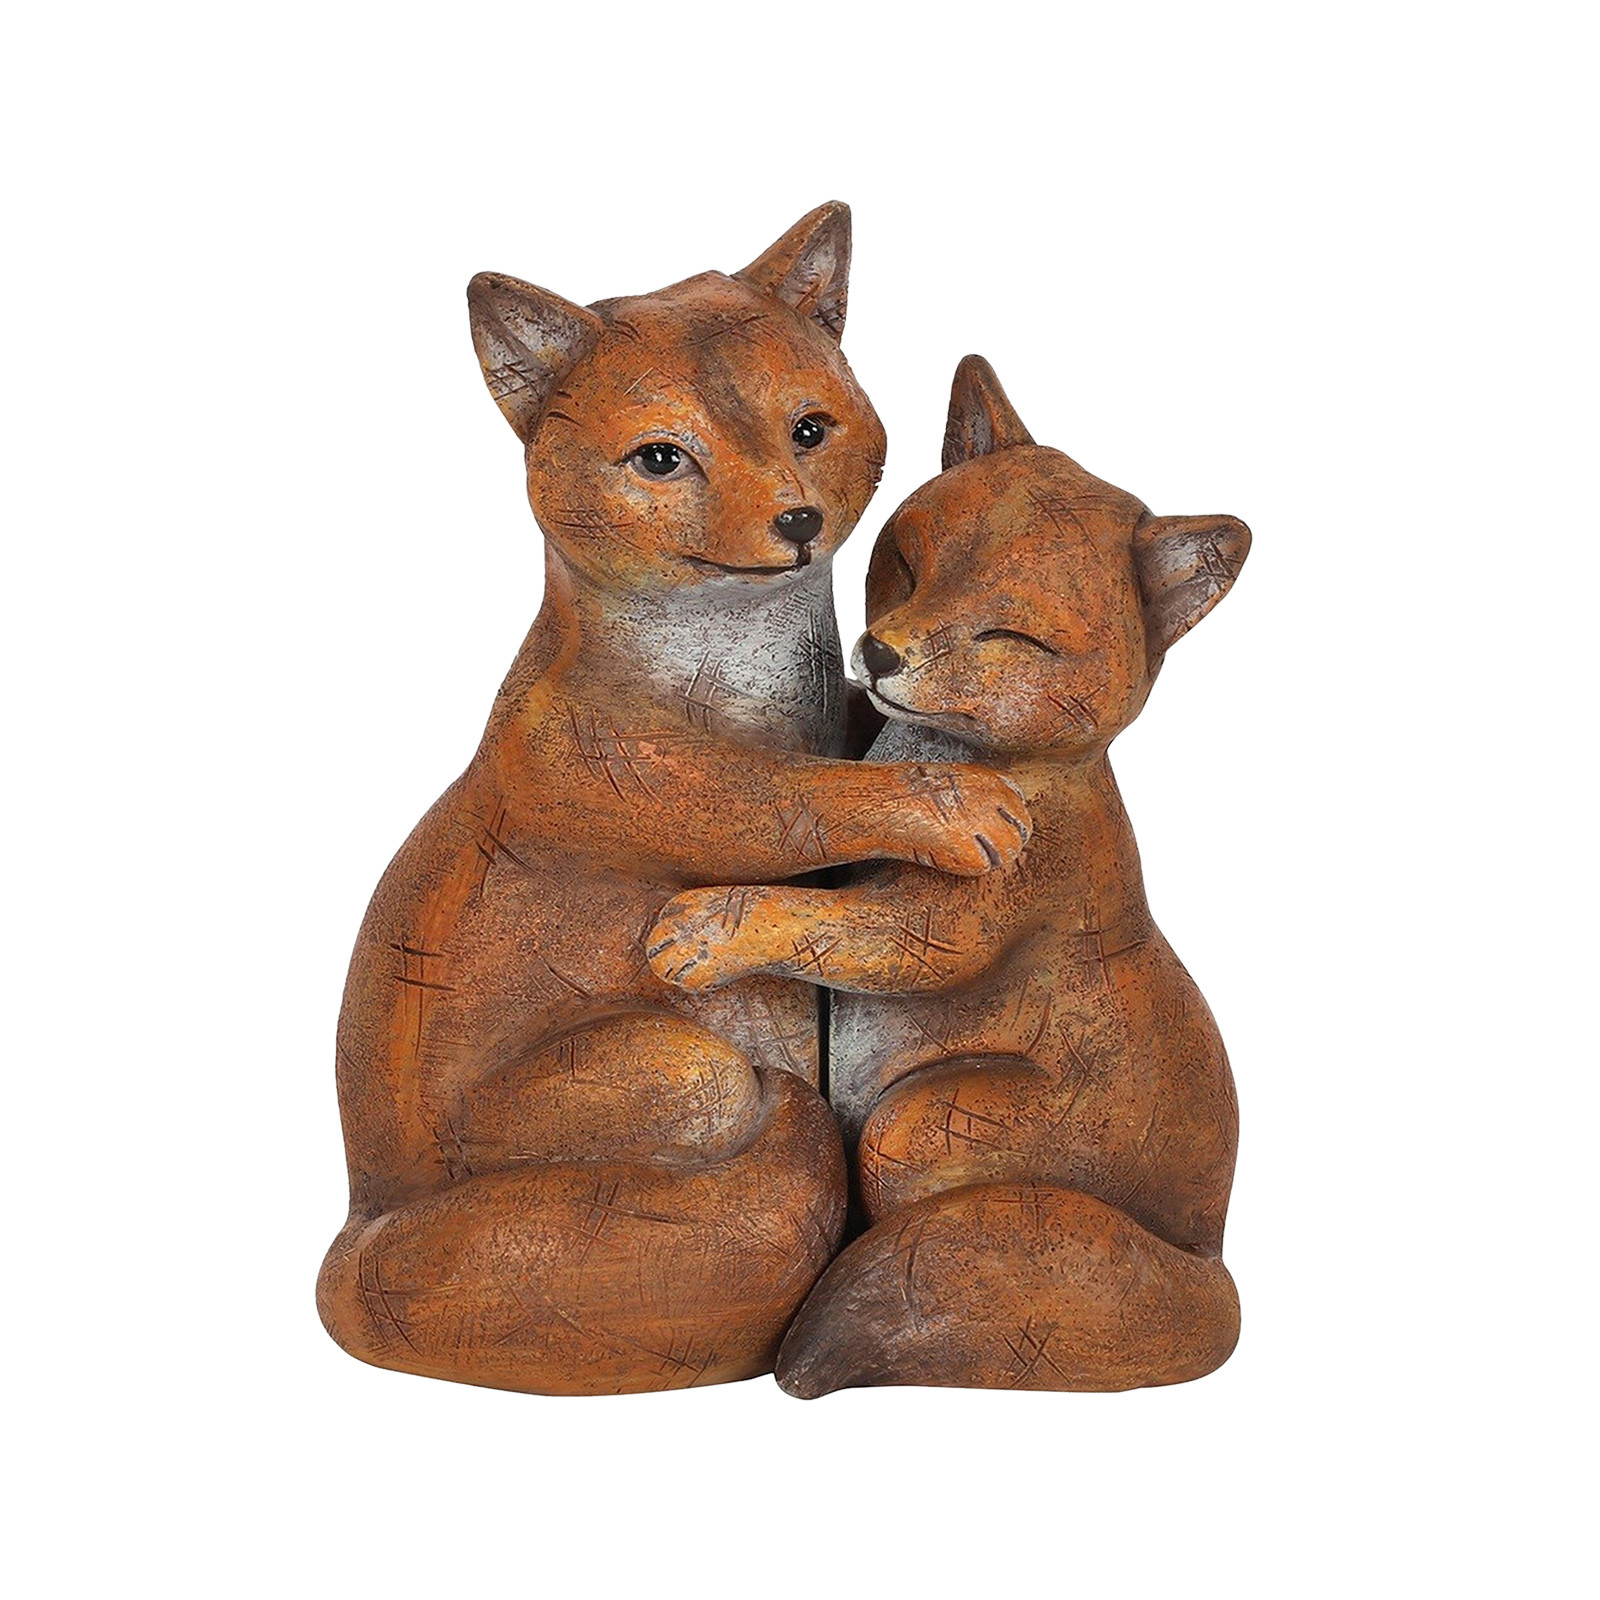 Vikakiooze 2022 Home Decor Clearance Simulation Rabbit Couple Sculpture Jewelry Garden Decoration Ornaments Crafts Gifts - image 1 of 1